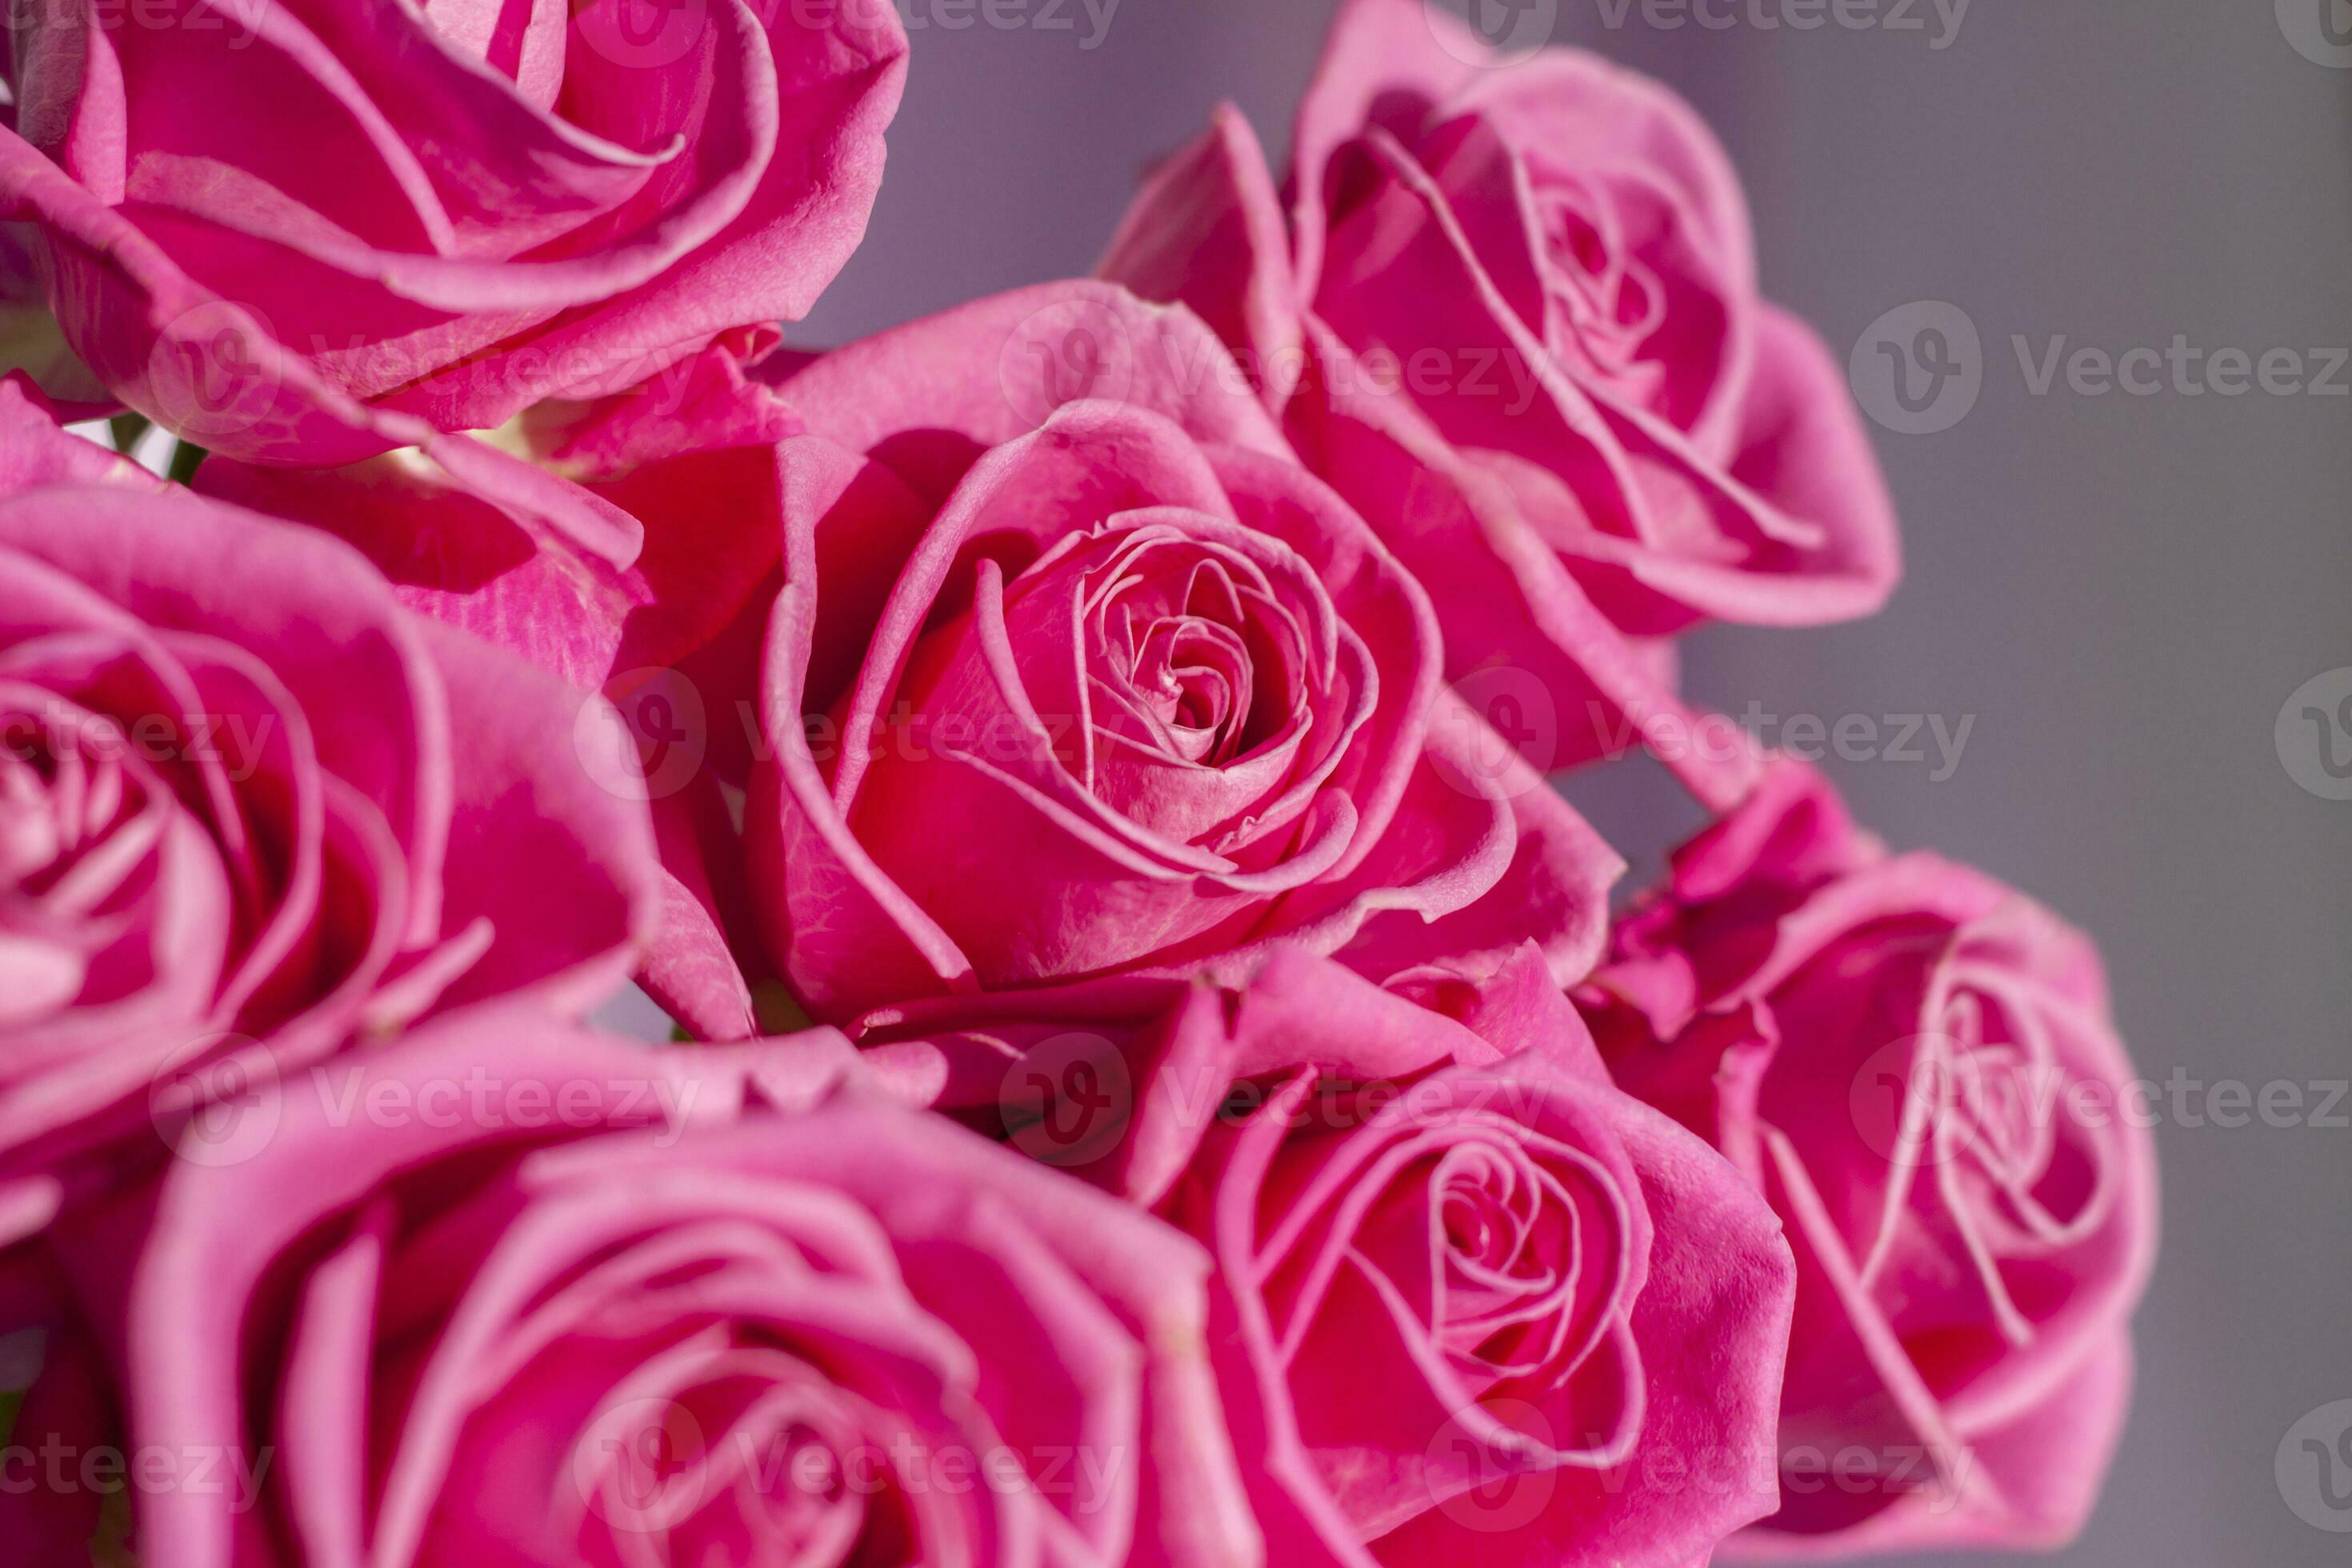 Bouquet of pink roses next to a gift with a happy birthday card